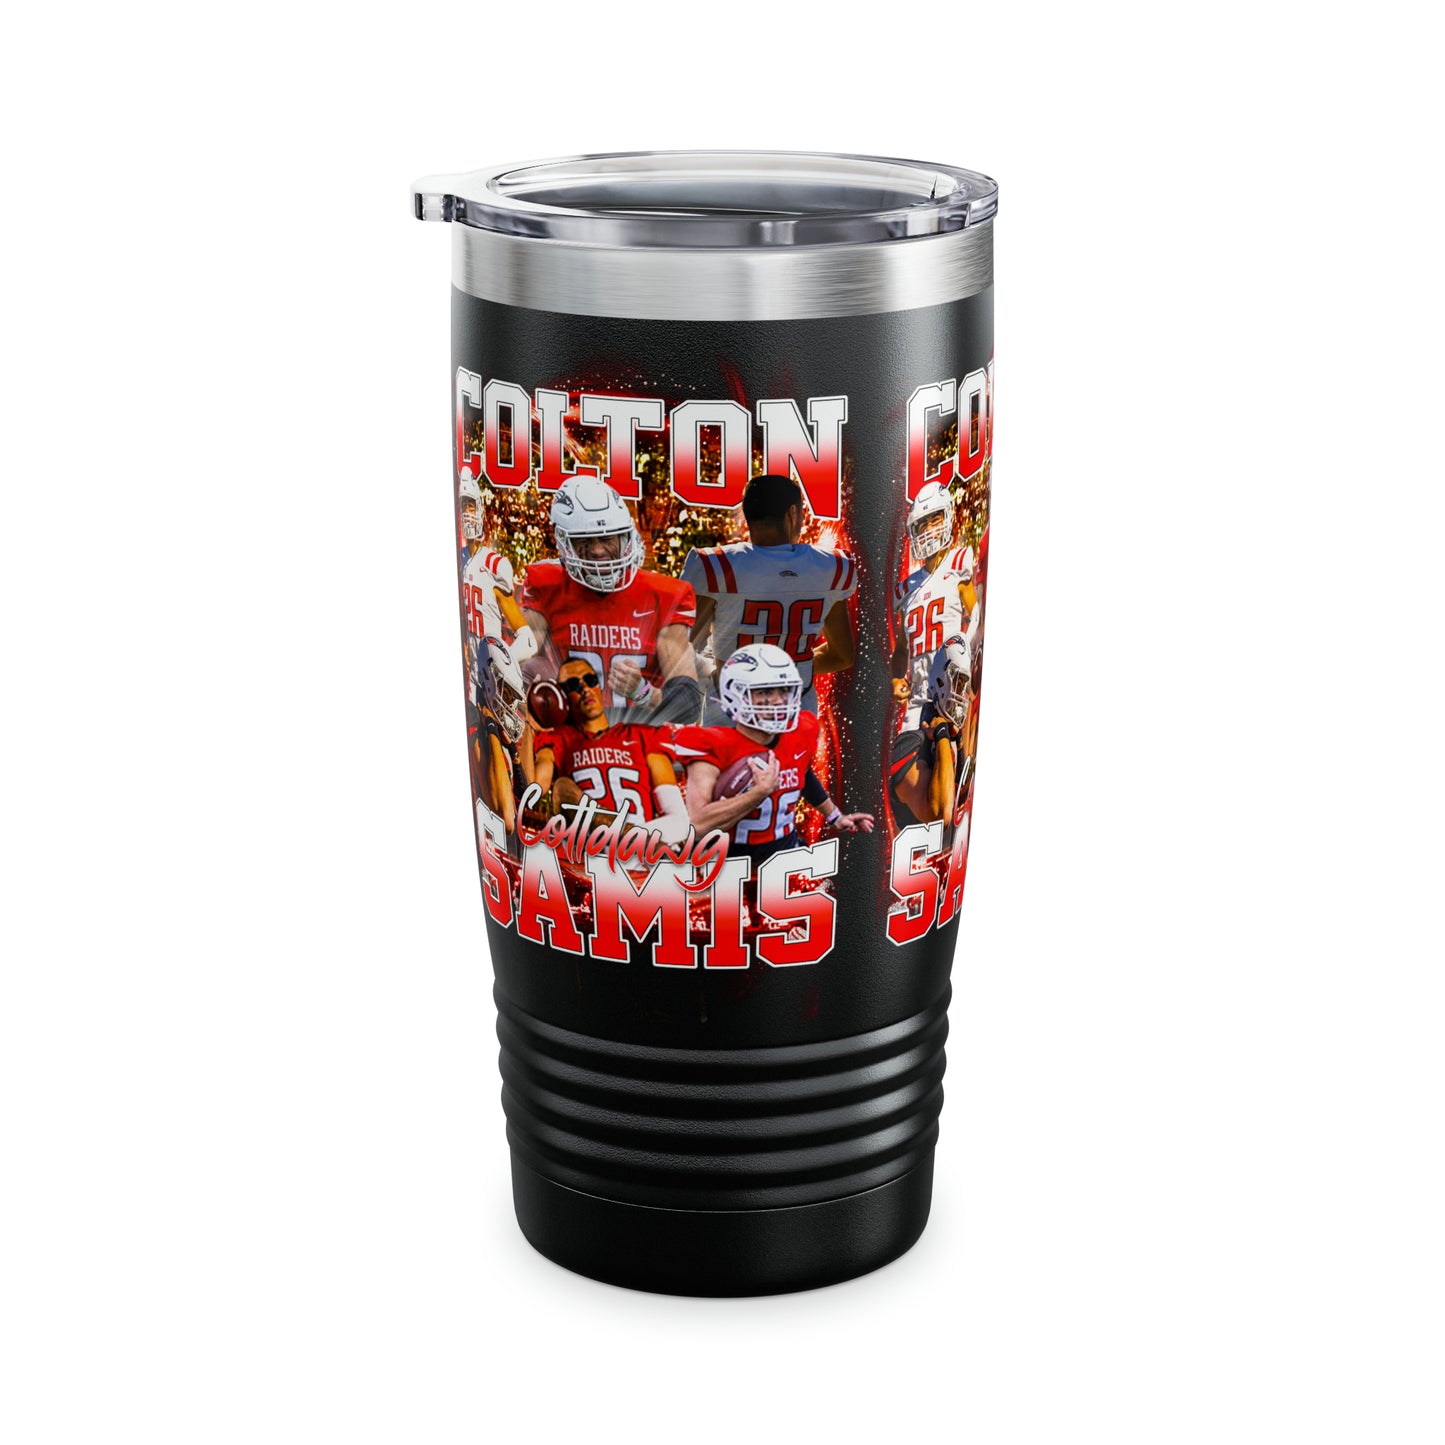 Colton Samis Stainless Steal Tumbler